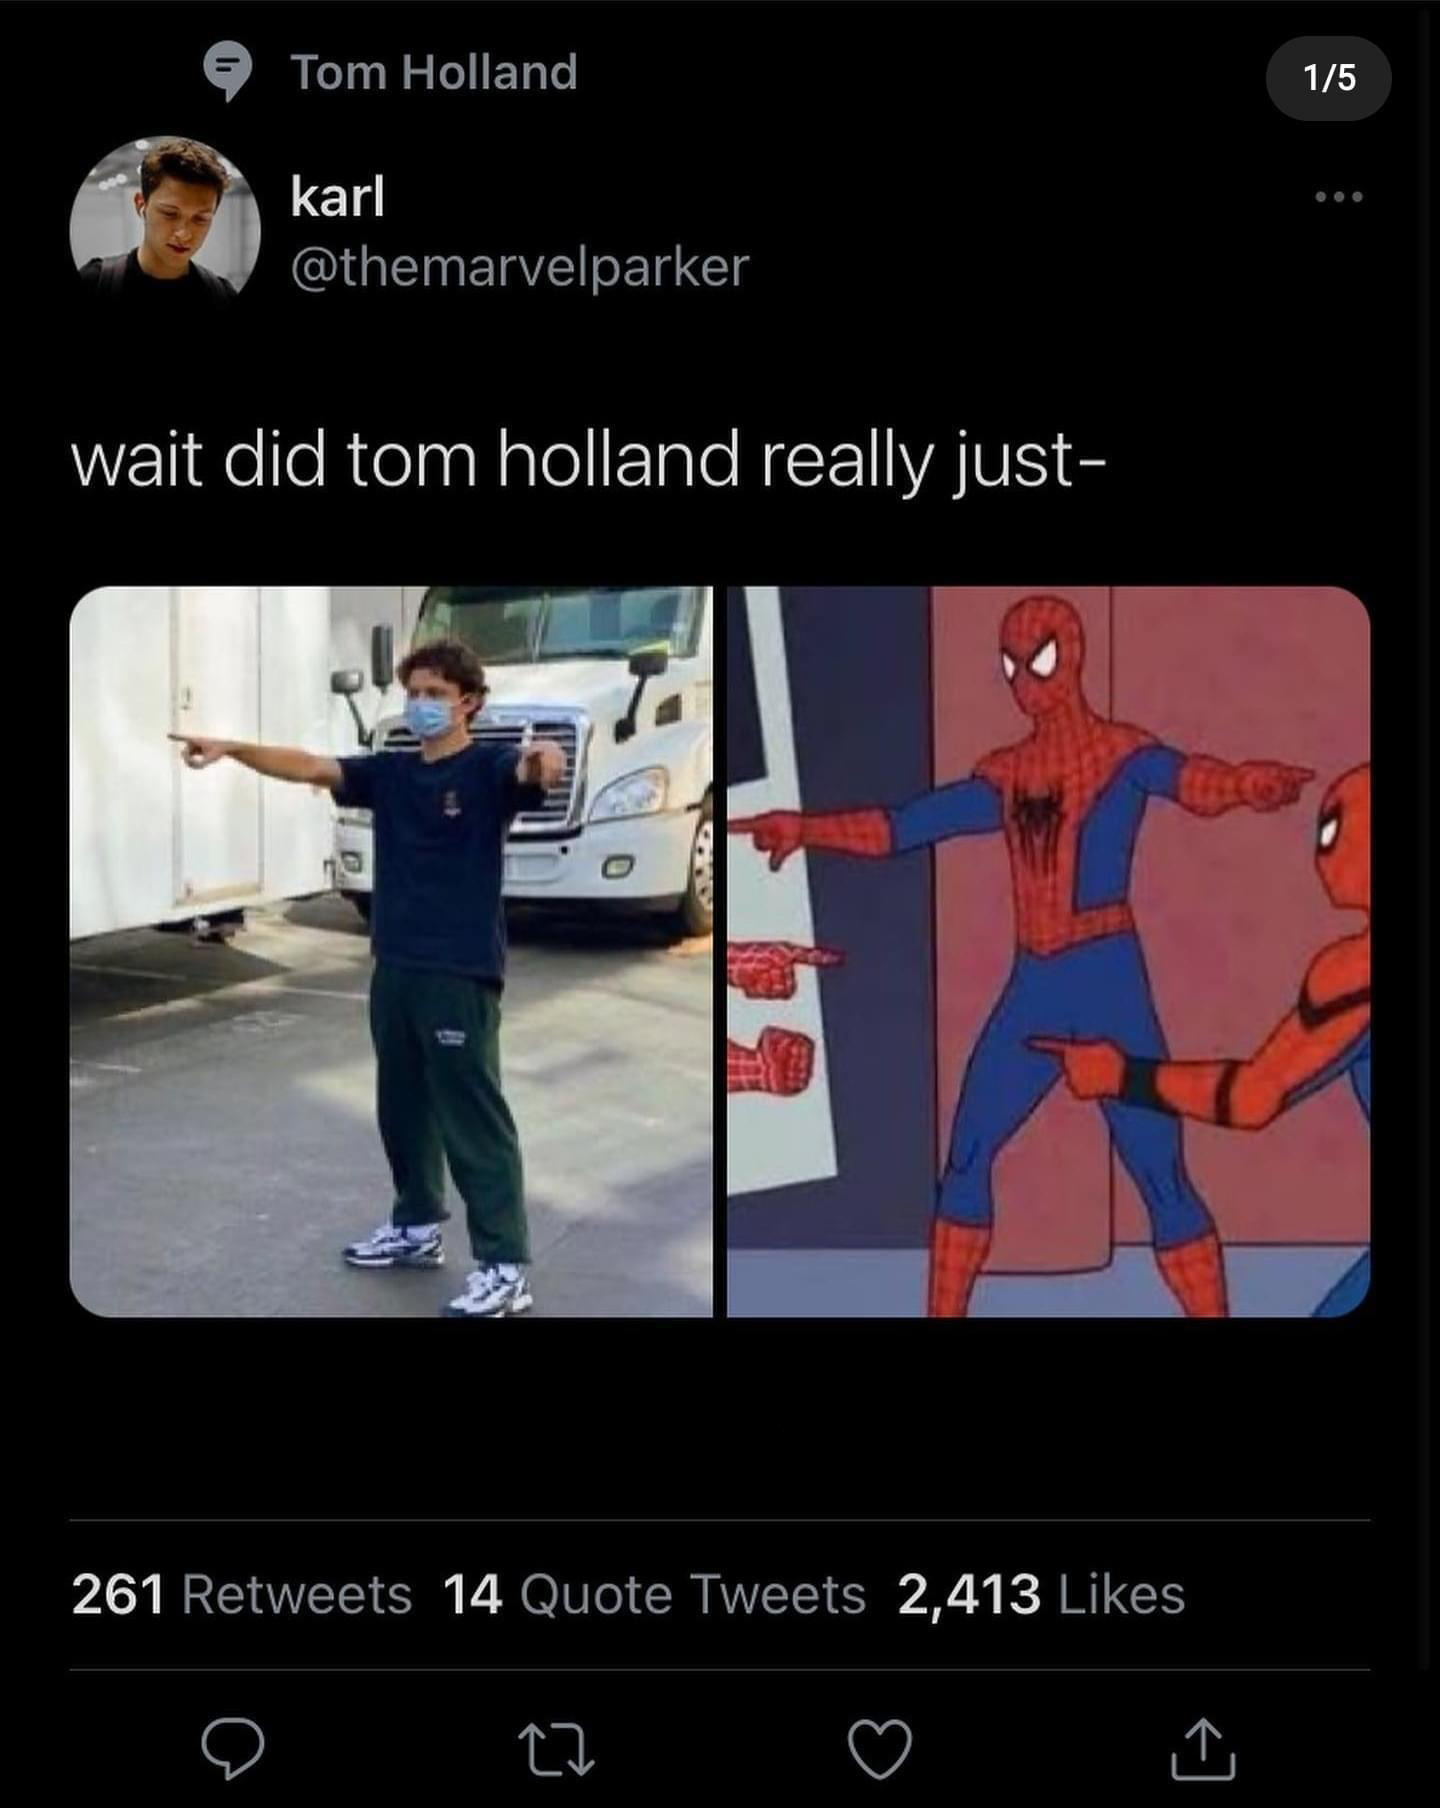 screenshot - Tom Holland 15 karl wait did tom holland really just 261 14 Quote Tweets 2,413 27